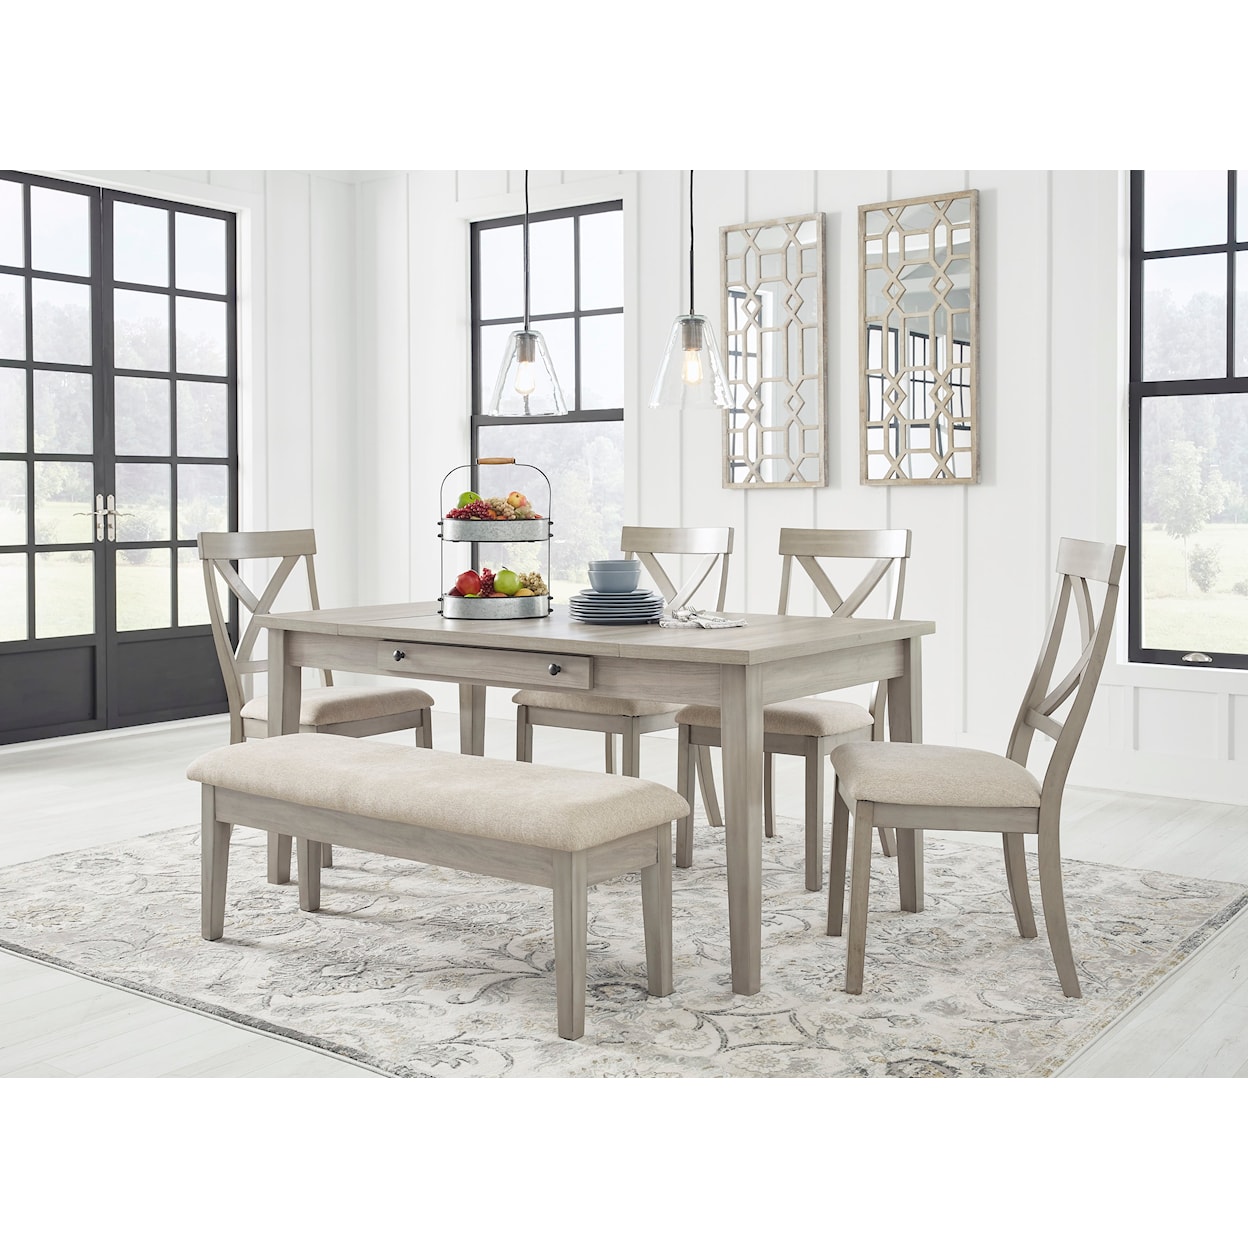 Ashley Signature Design Parellen 6-Piece Table and Chair Set with Bench